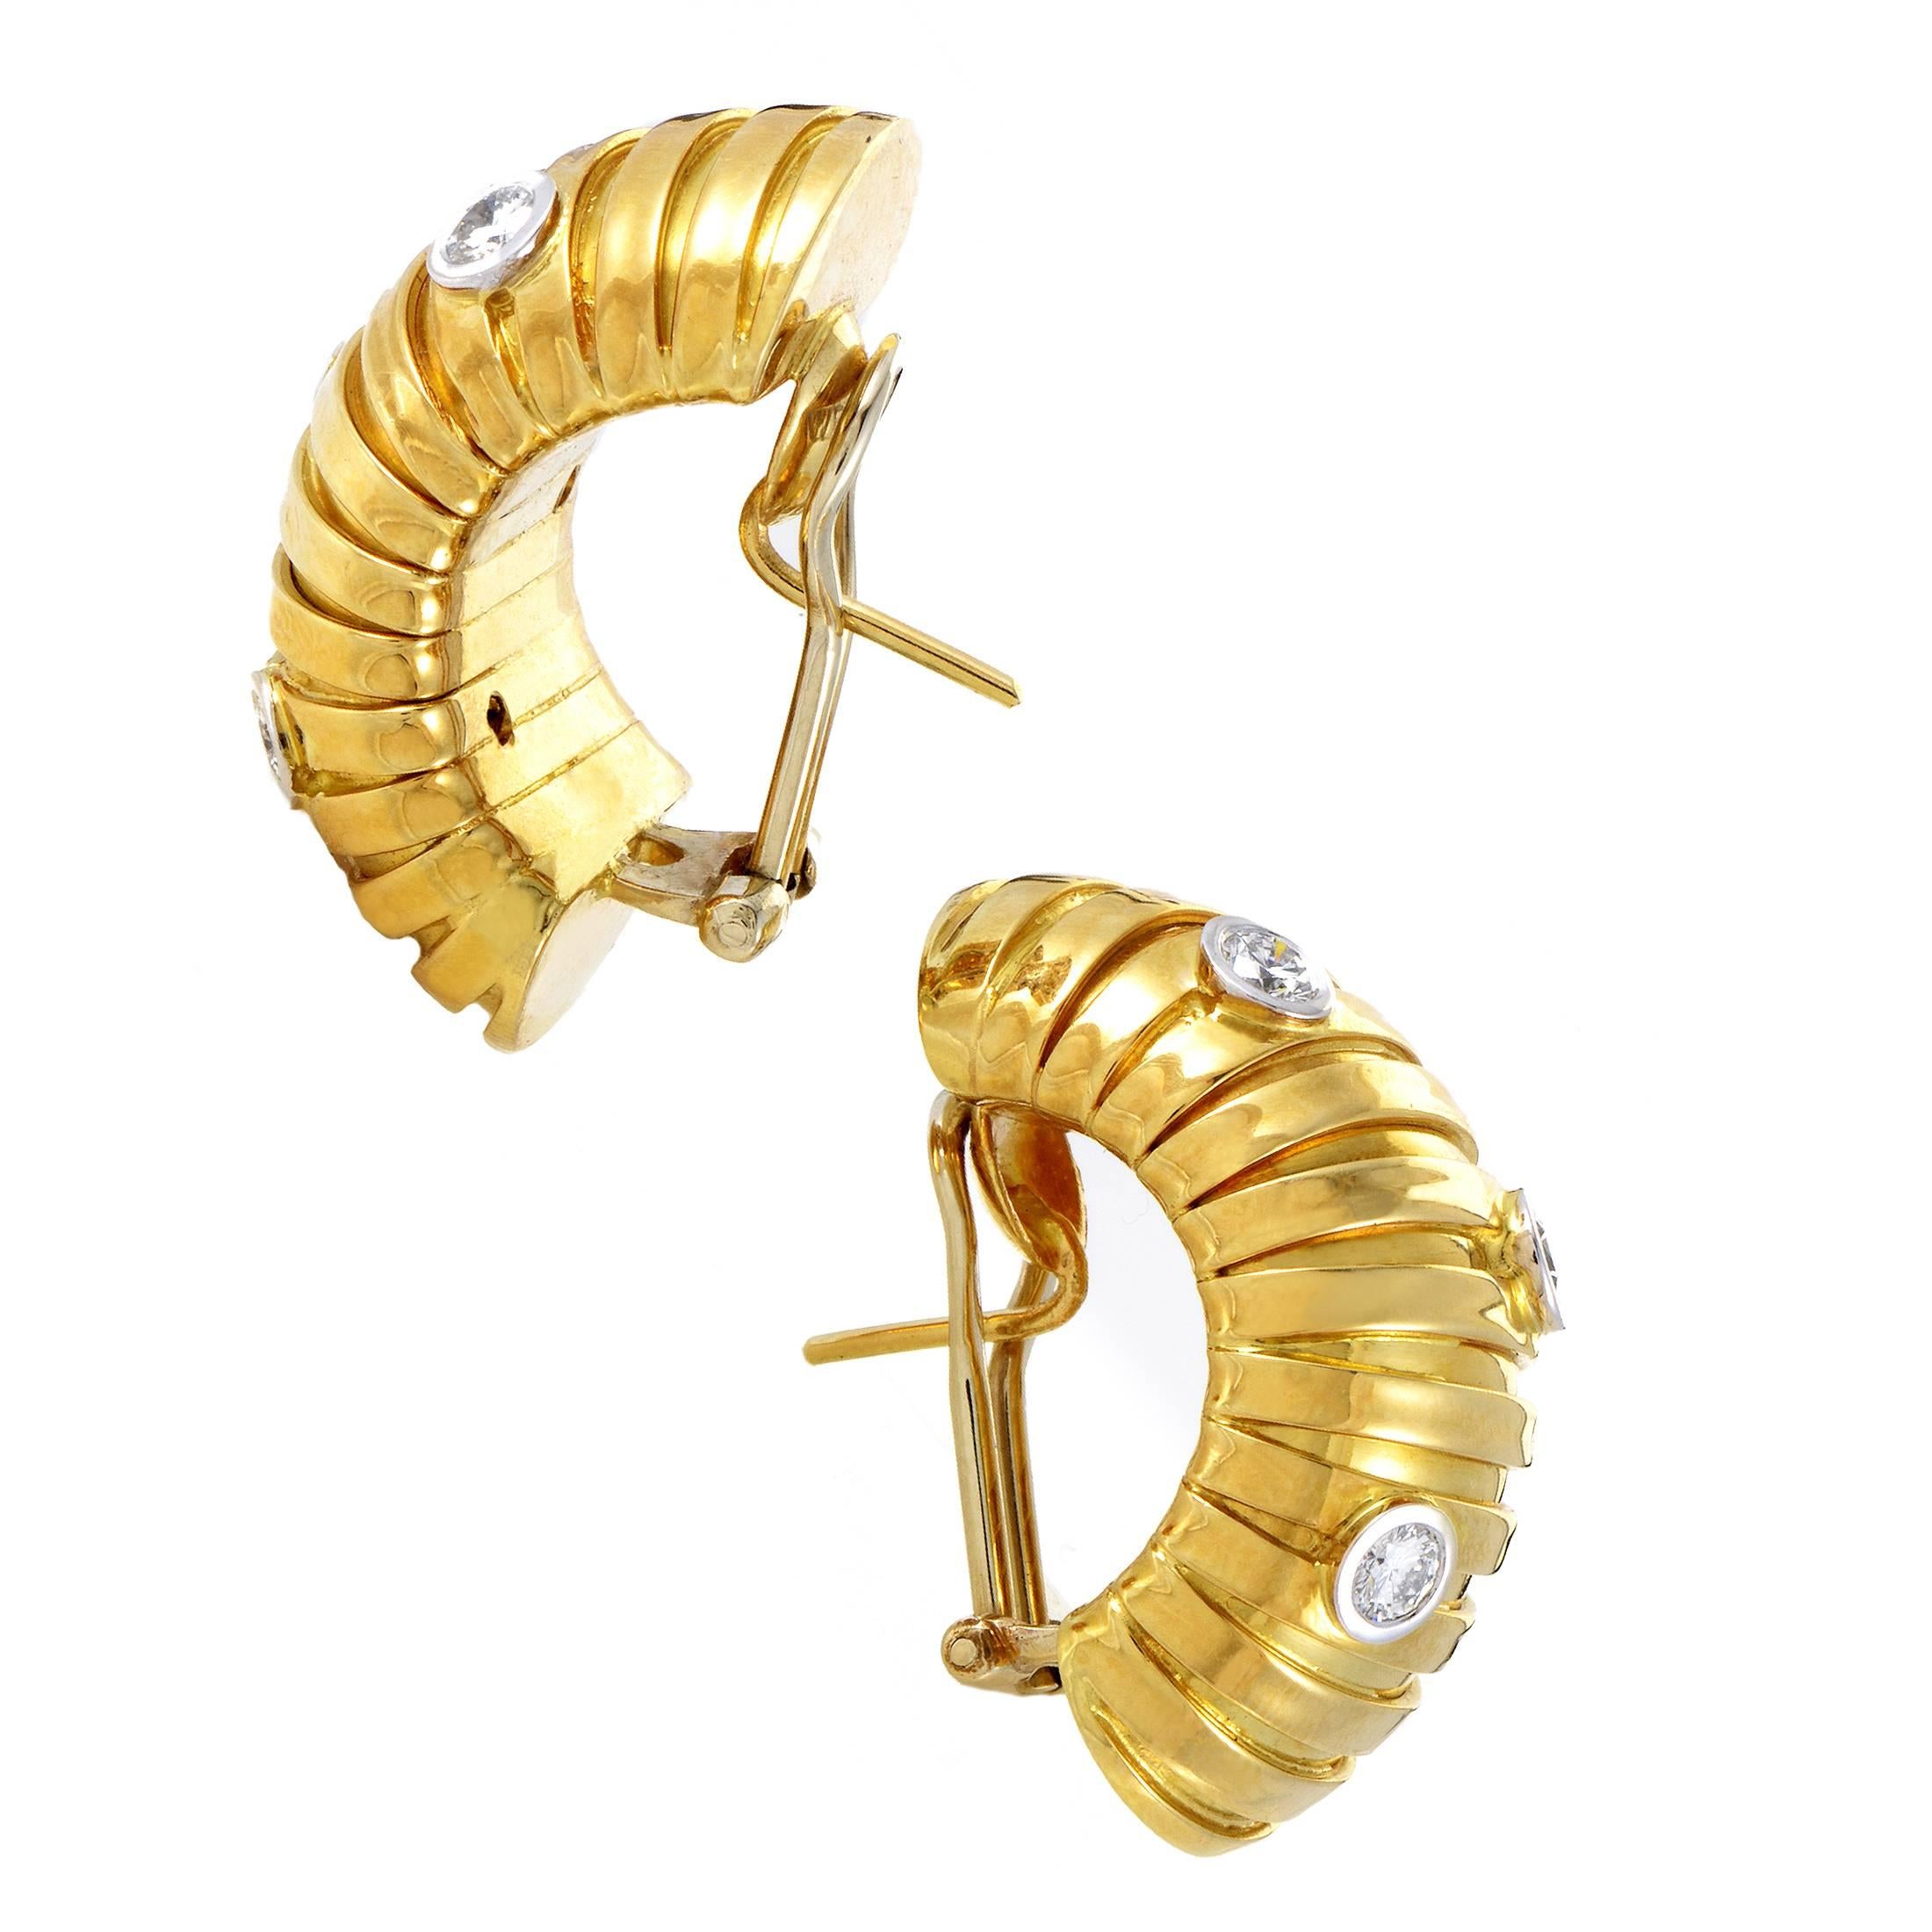 The fabulously warm and immaculately gleaming 18K yellow gold is brilliantly contrasted by the bright shimmering 18K white gold which is adorned with resplendent diamonds weighing in total 0.60ct in these fascinating earrings from Weingrill.